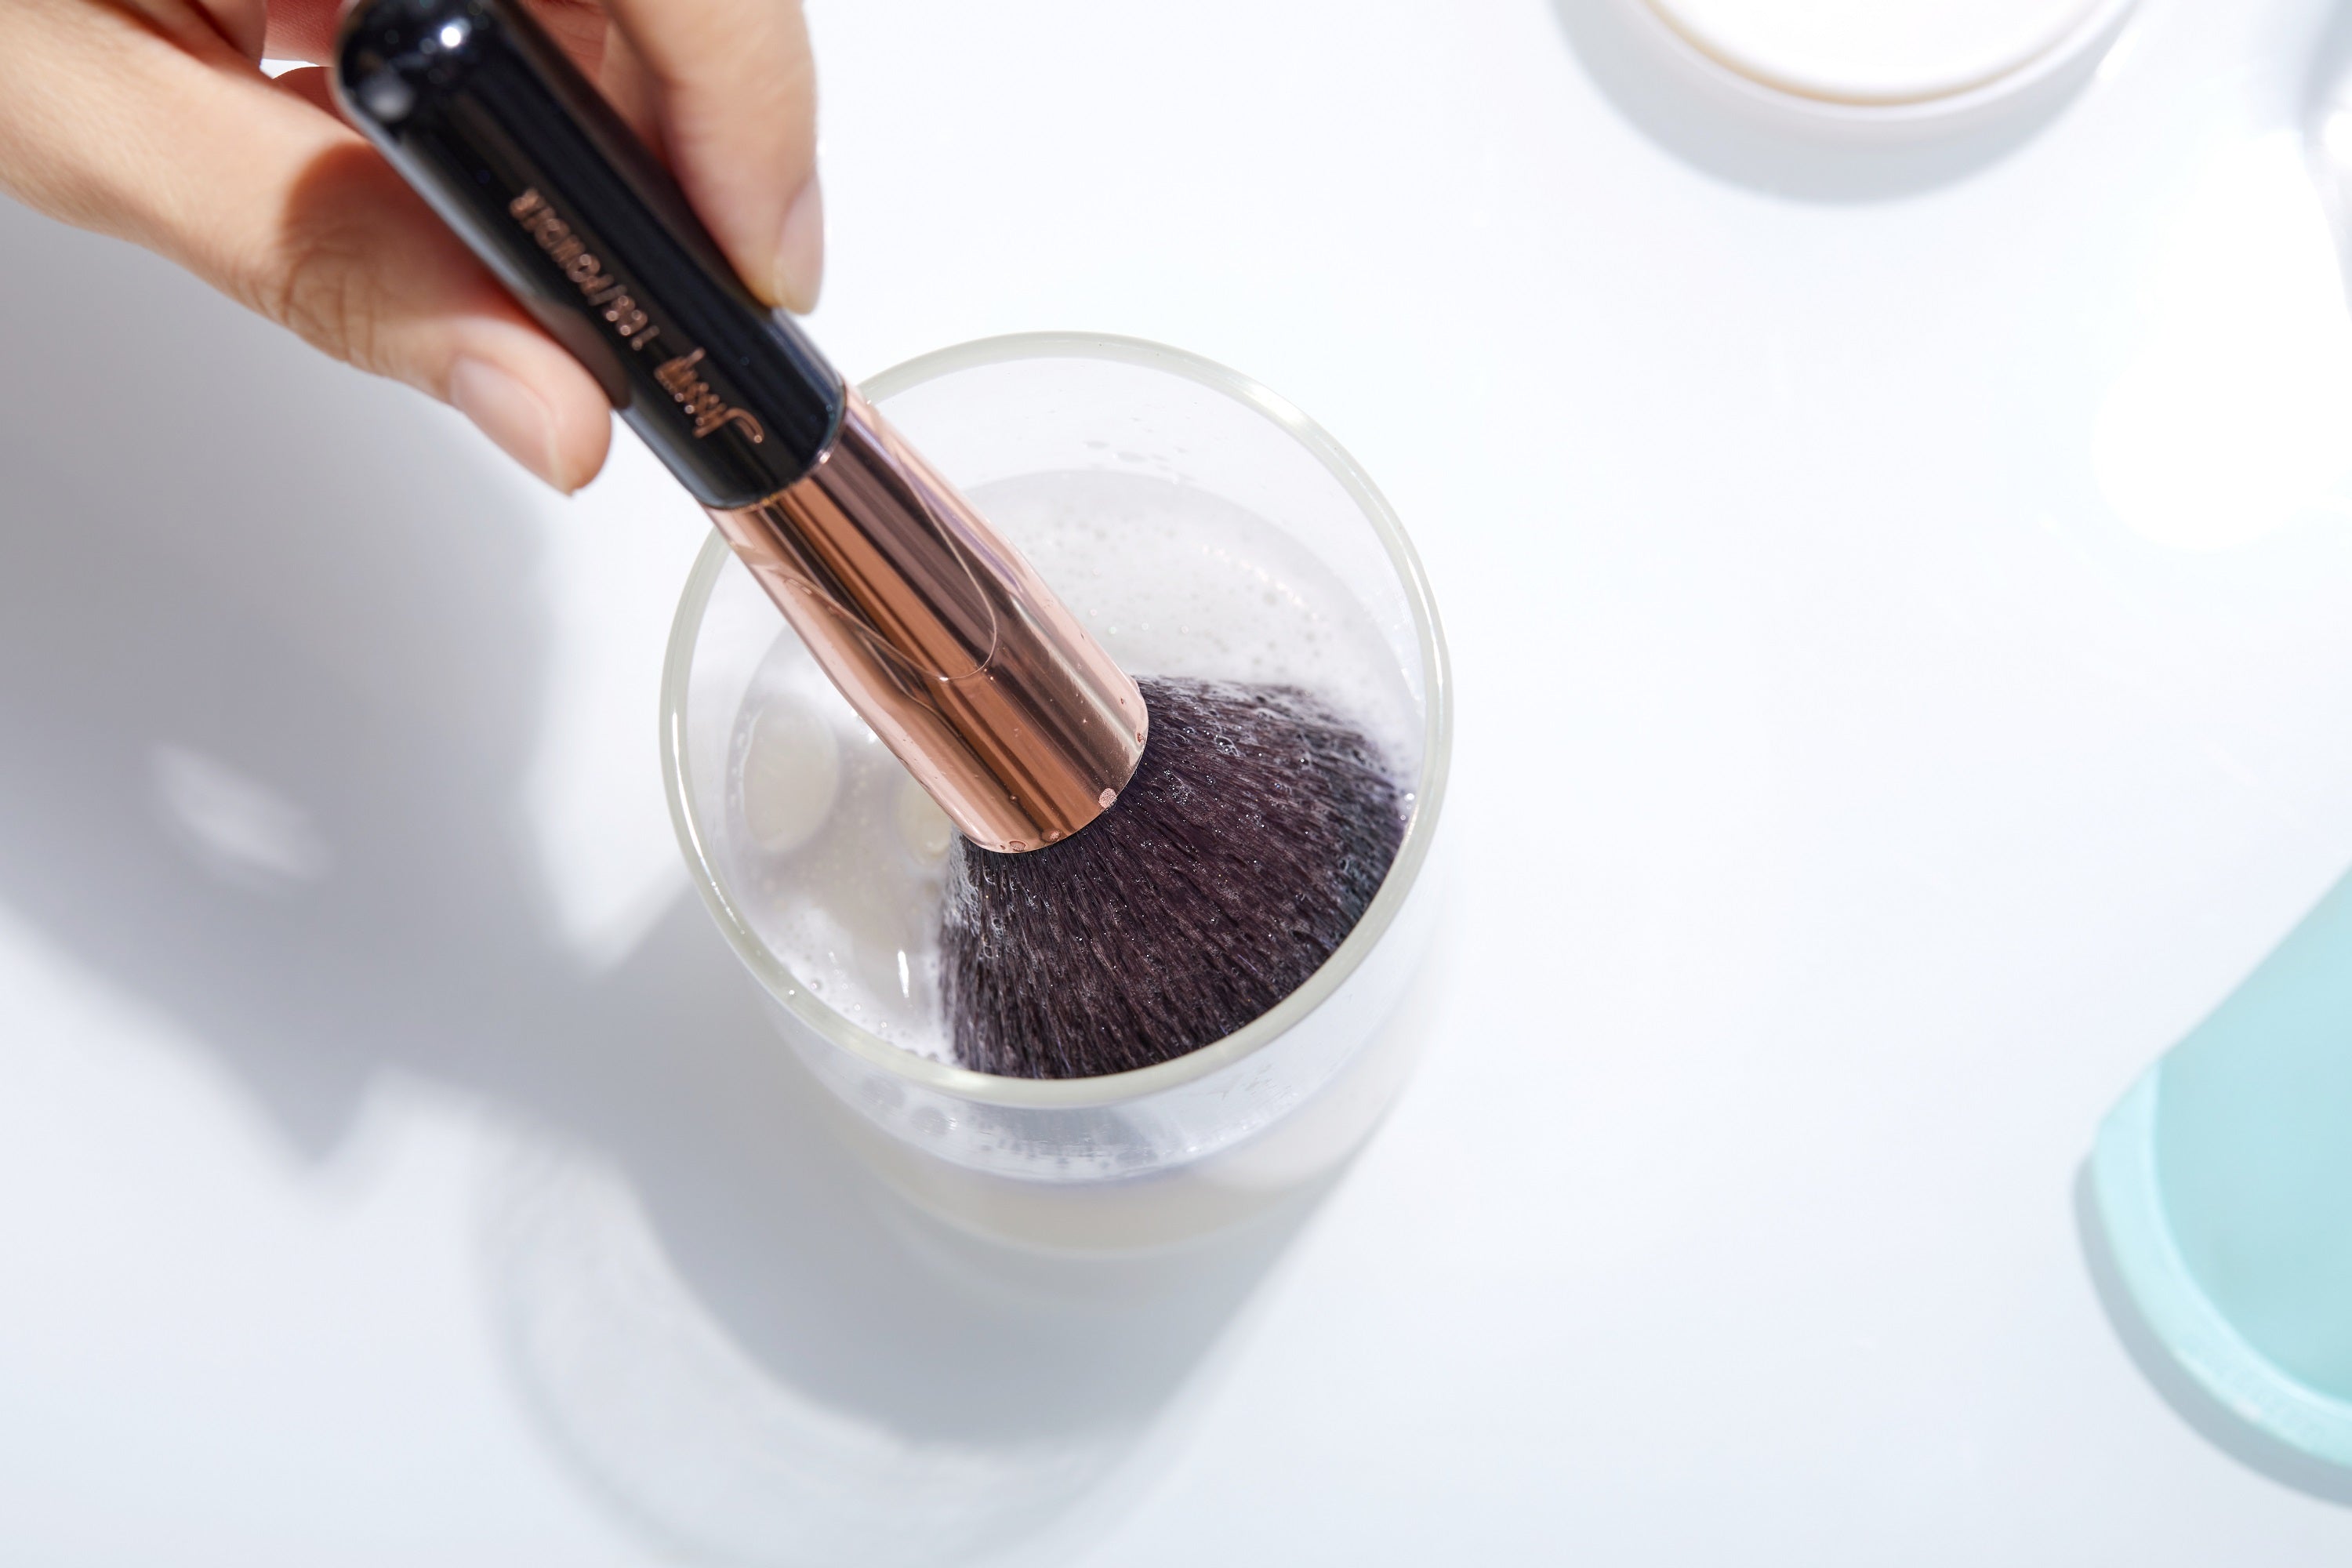 Tips for cleaning makeup brushes